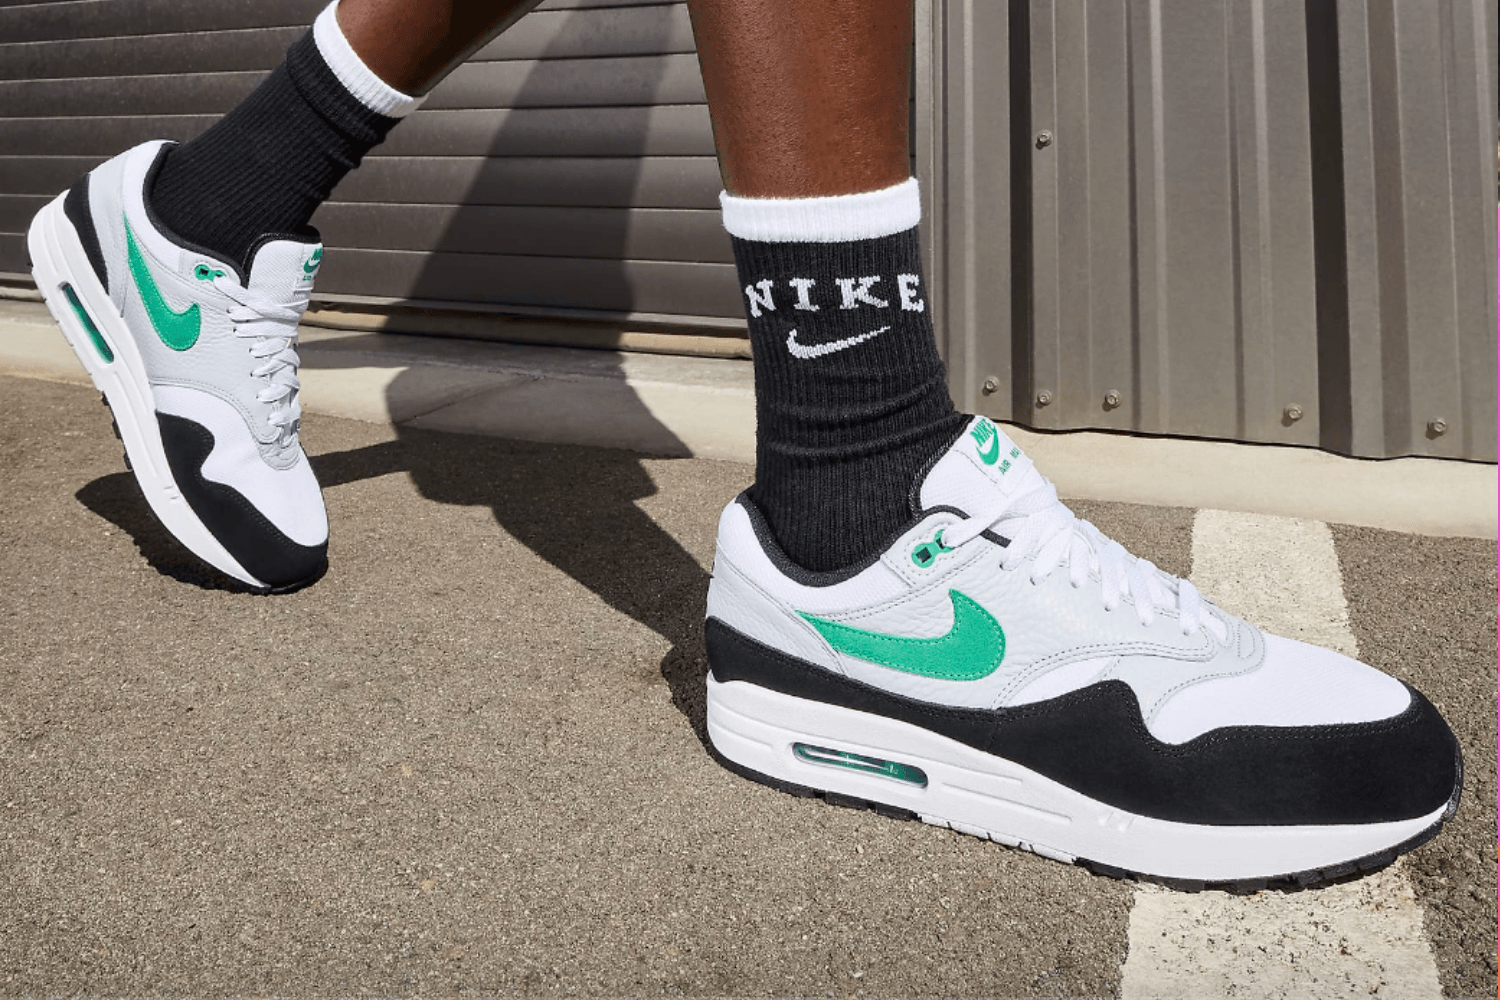 Last hours of the Nike End of Season sale: check out these popular Air Max Steals